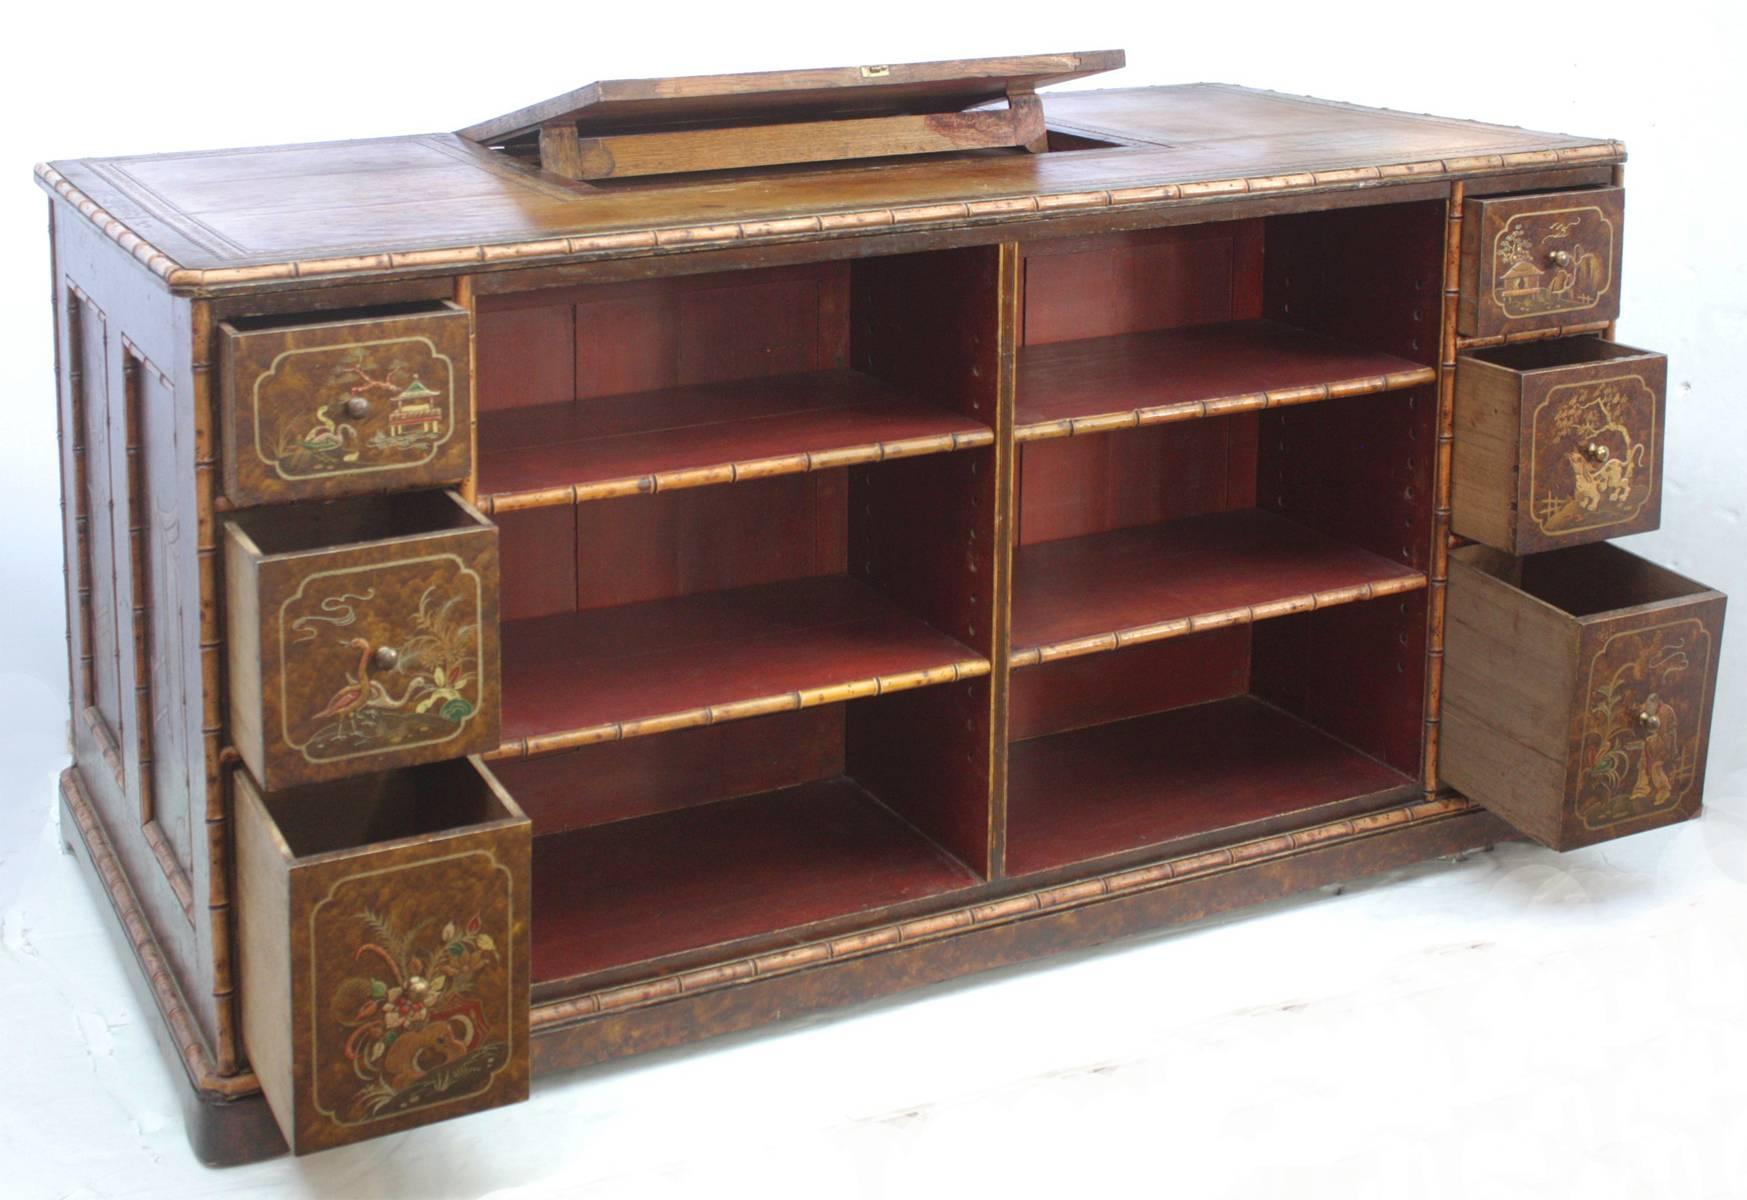 Embossed Chinoiserie Desk / Library Table with Faux Bamboo Trim